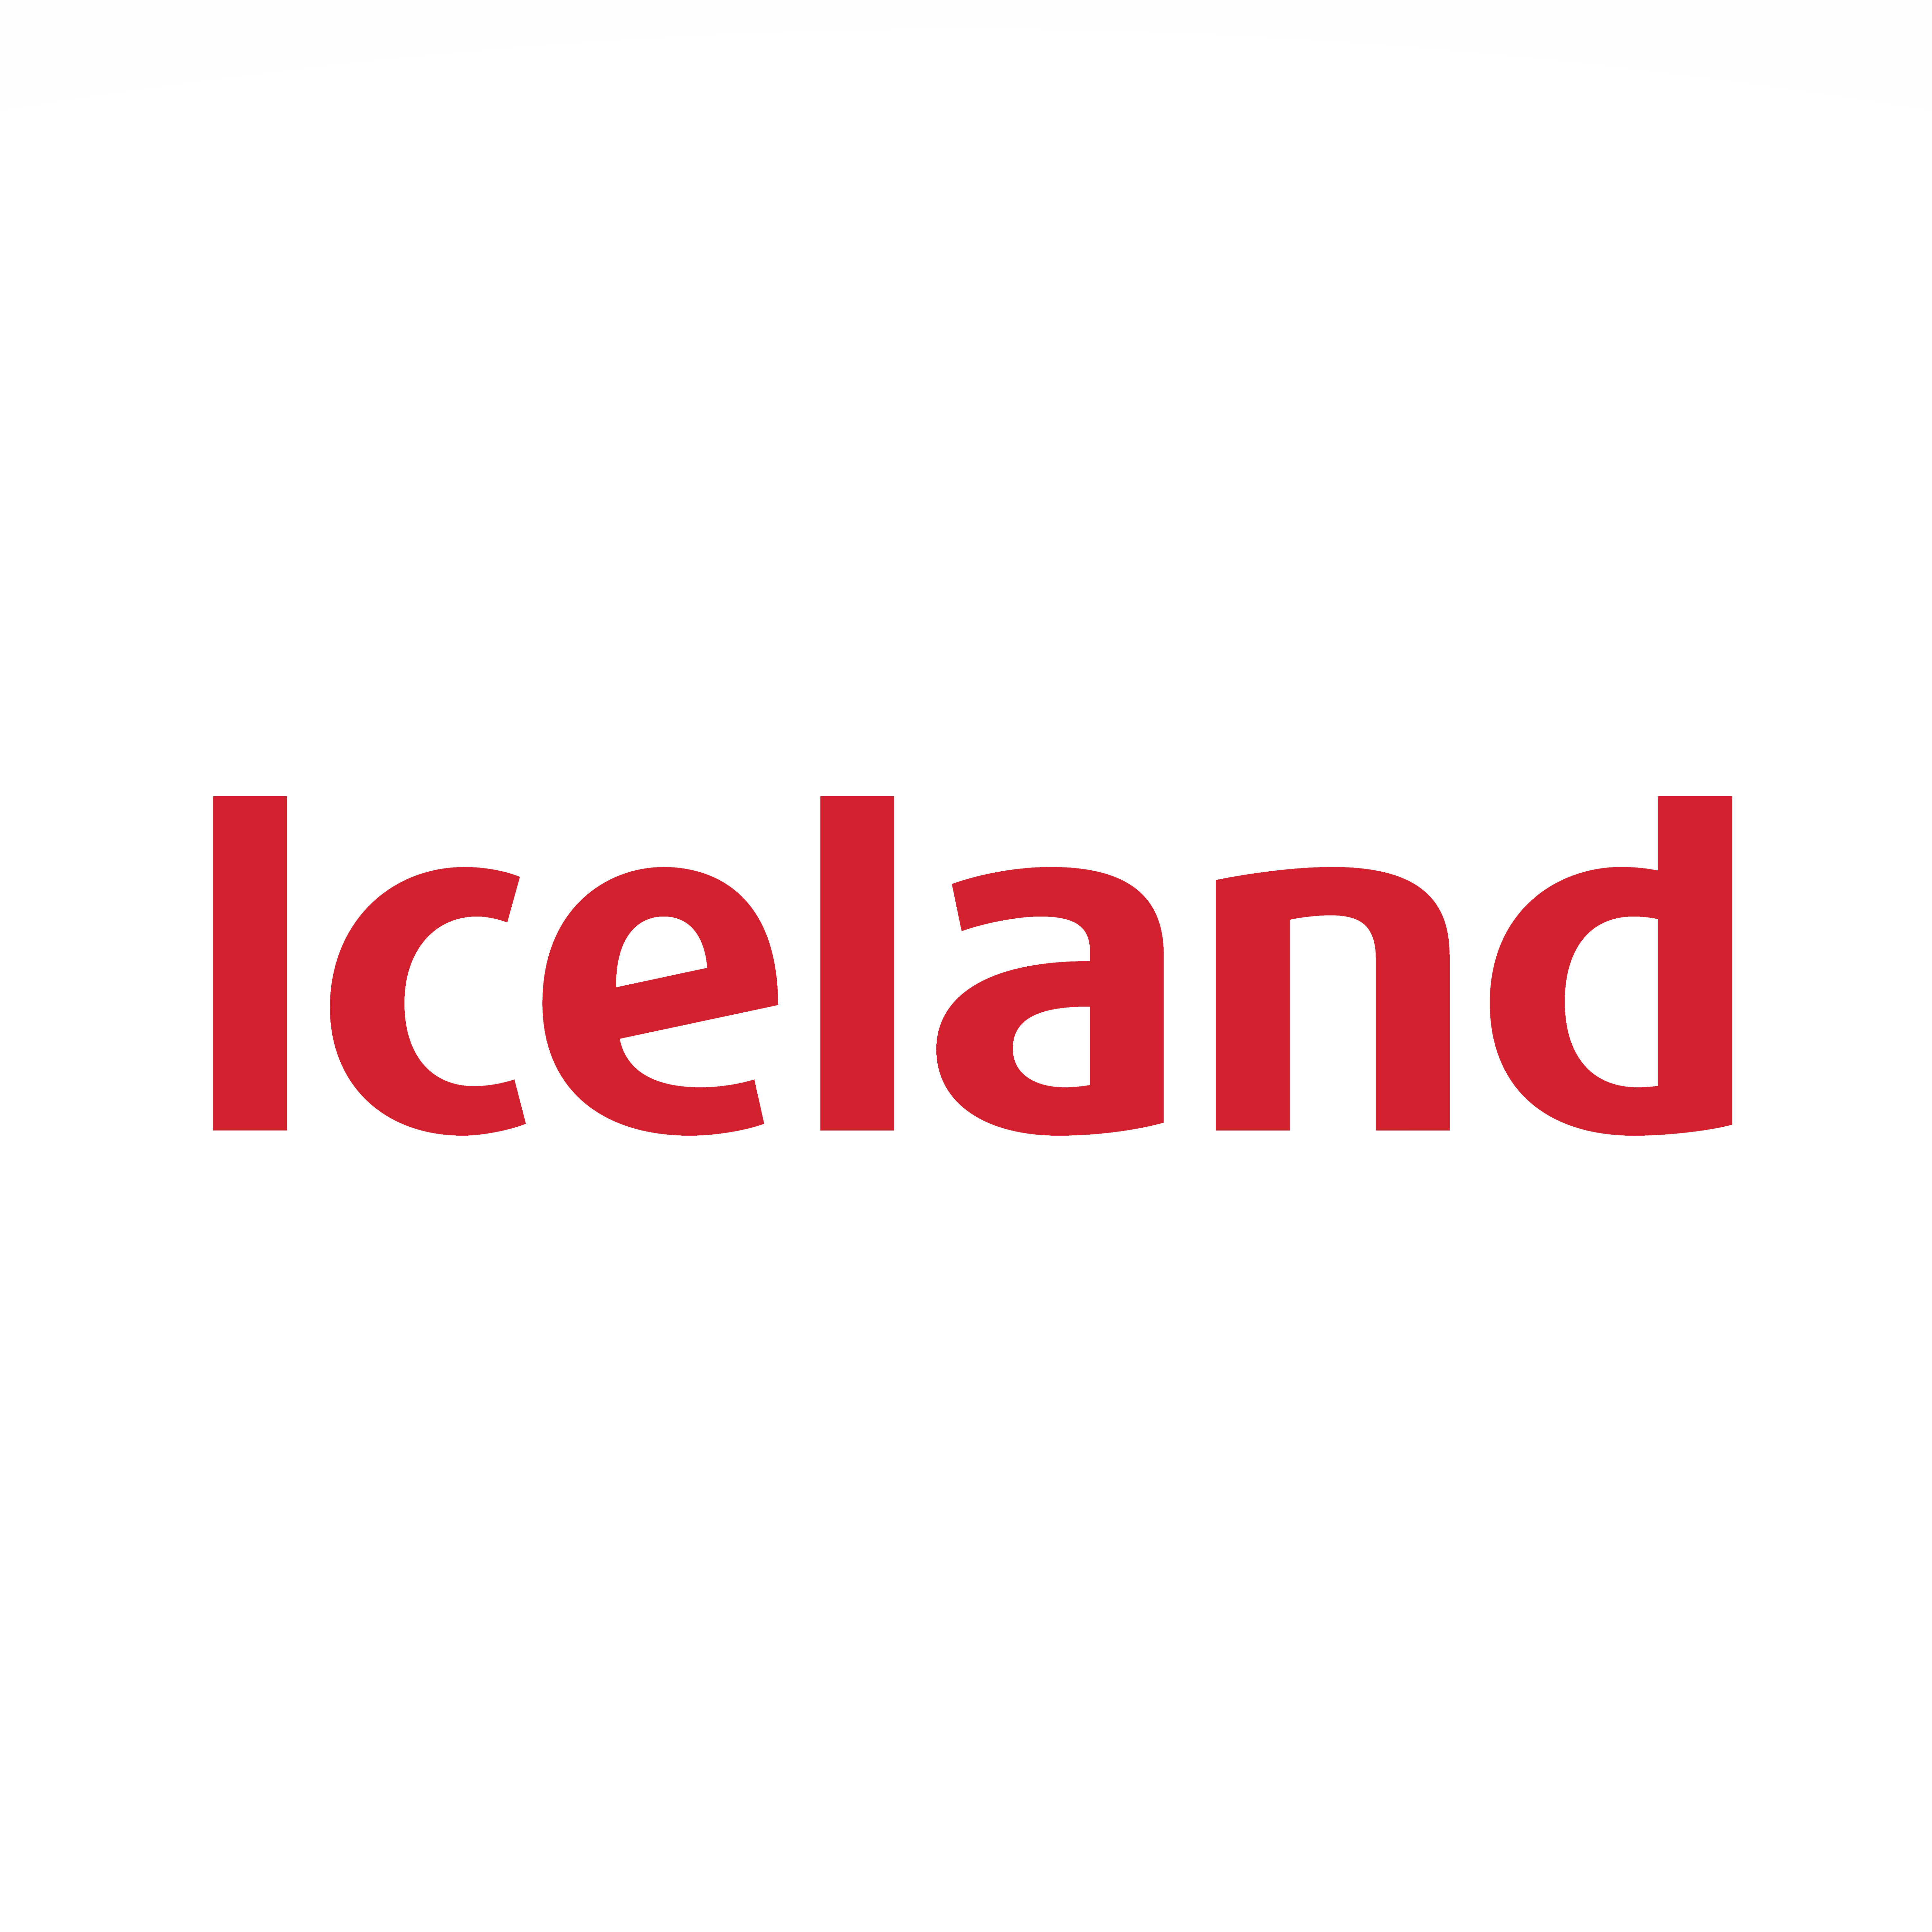 Iceland Coupons & Promo Codes